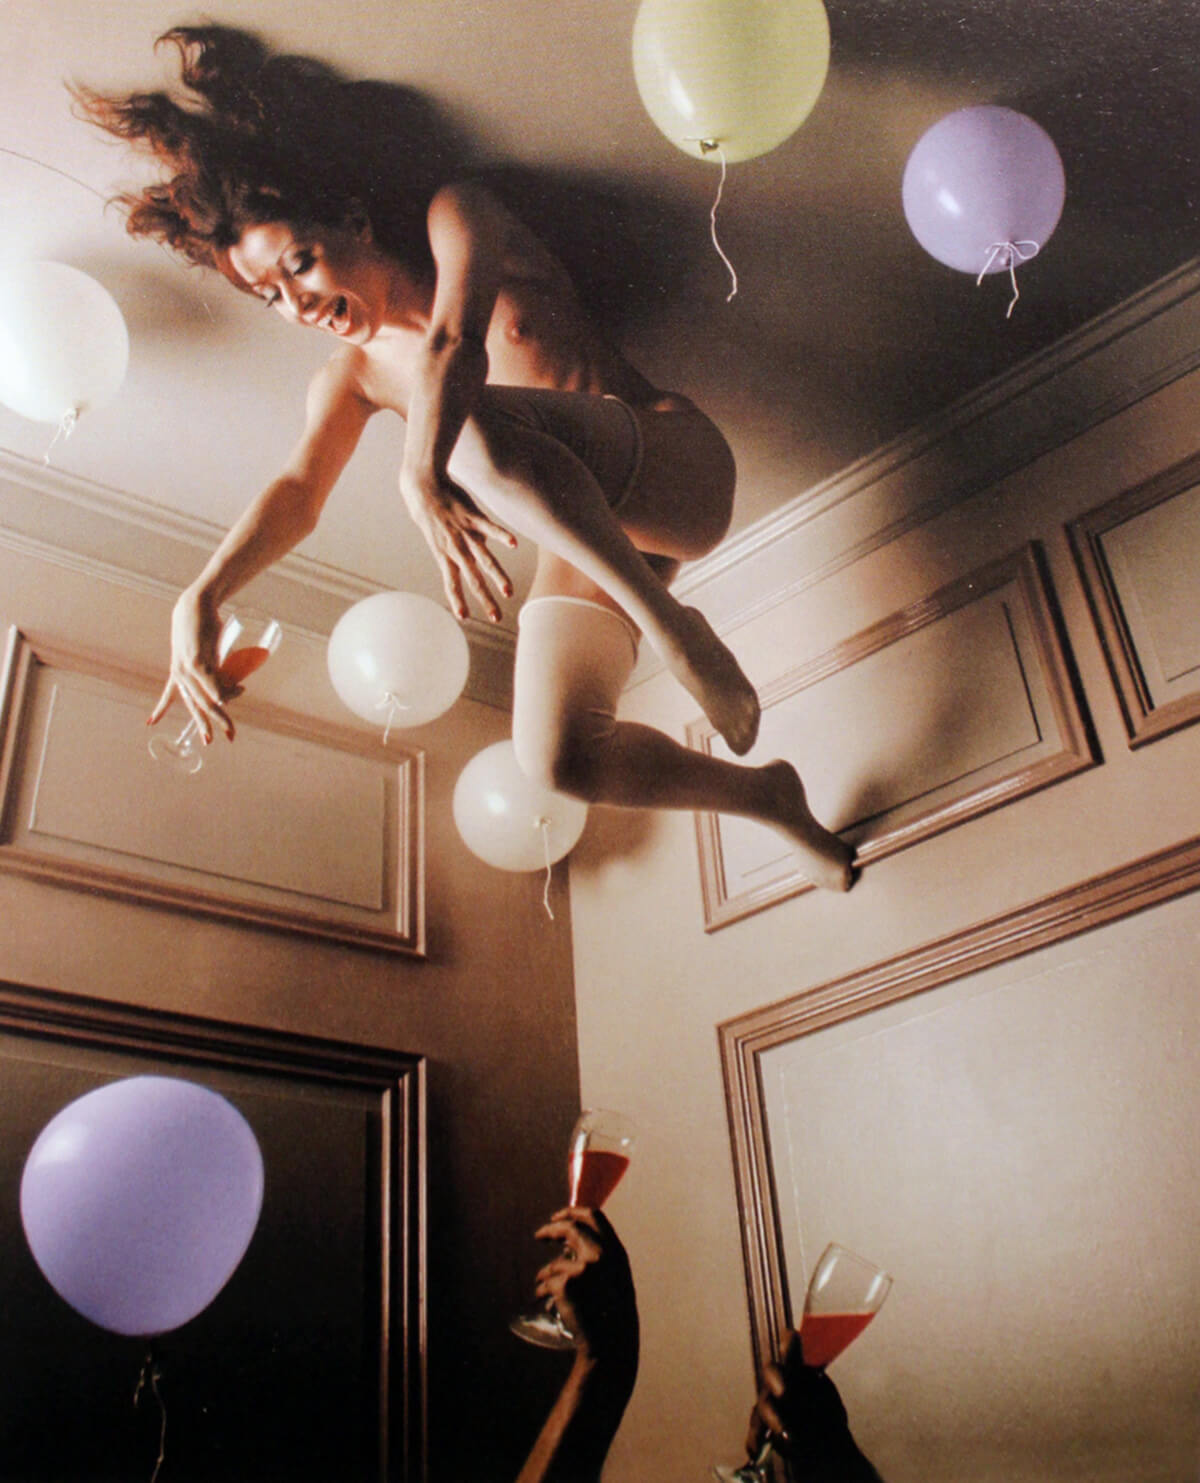 image of woman lying topless on the floor surrounded by balloons